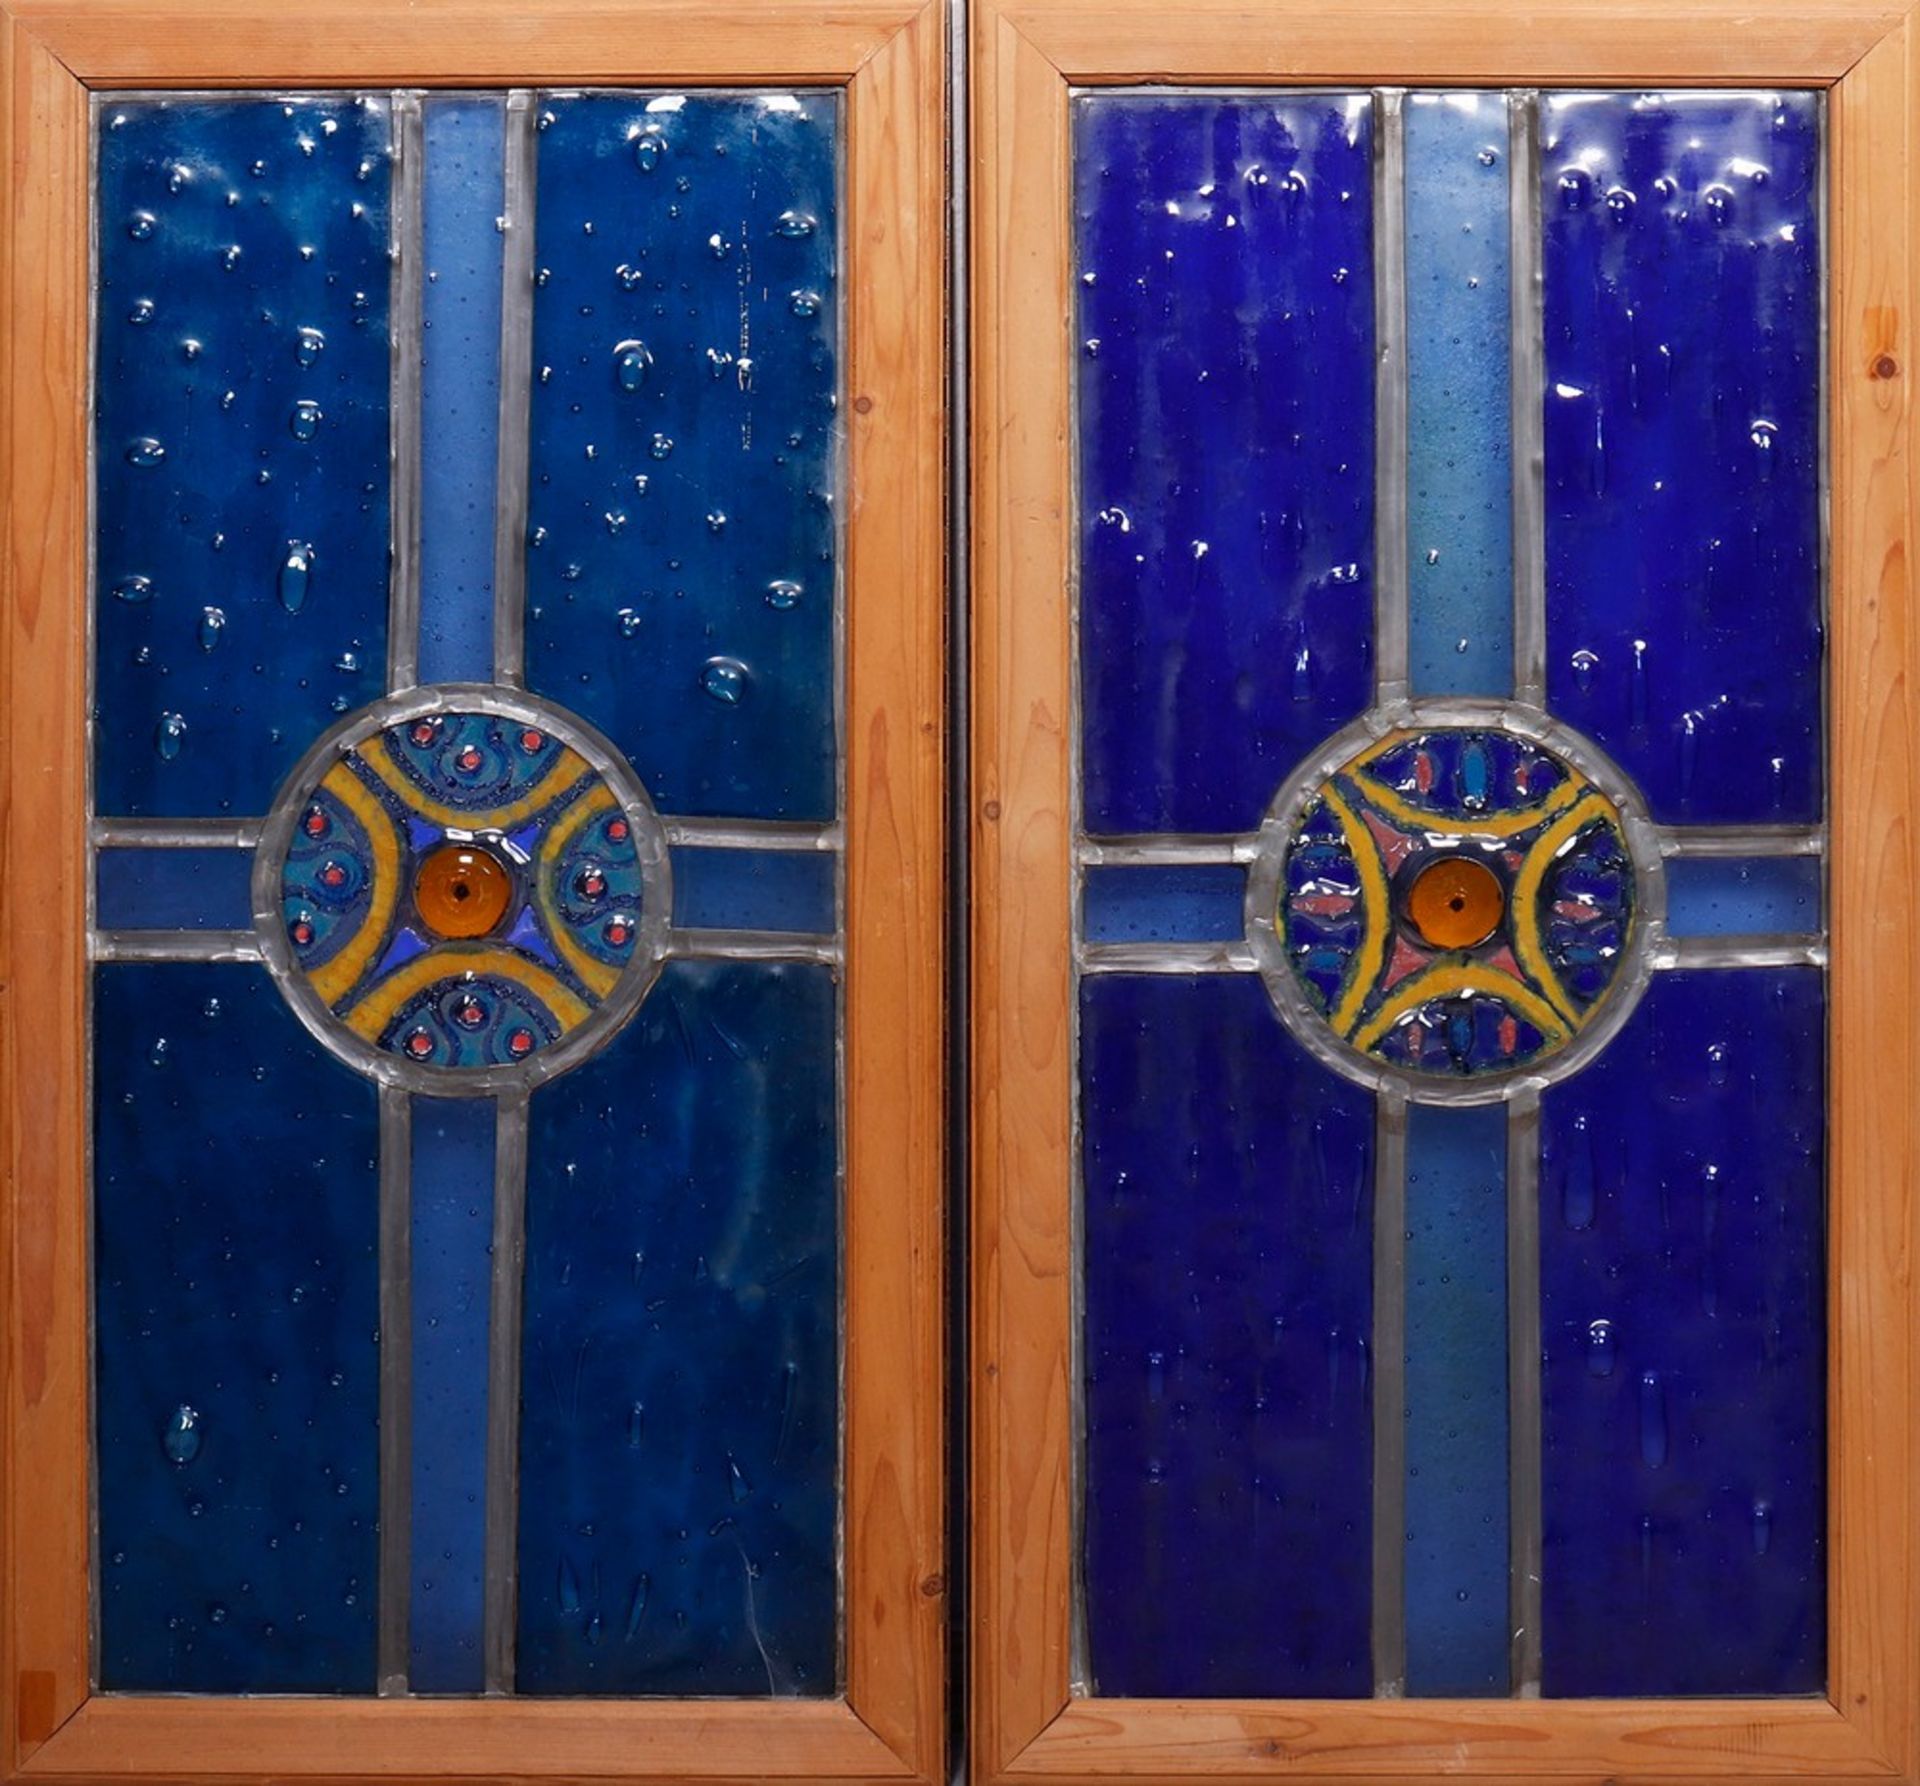 Pair of Art Deco stained glass windows, probably German, 1920s/30s